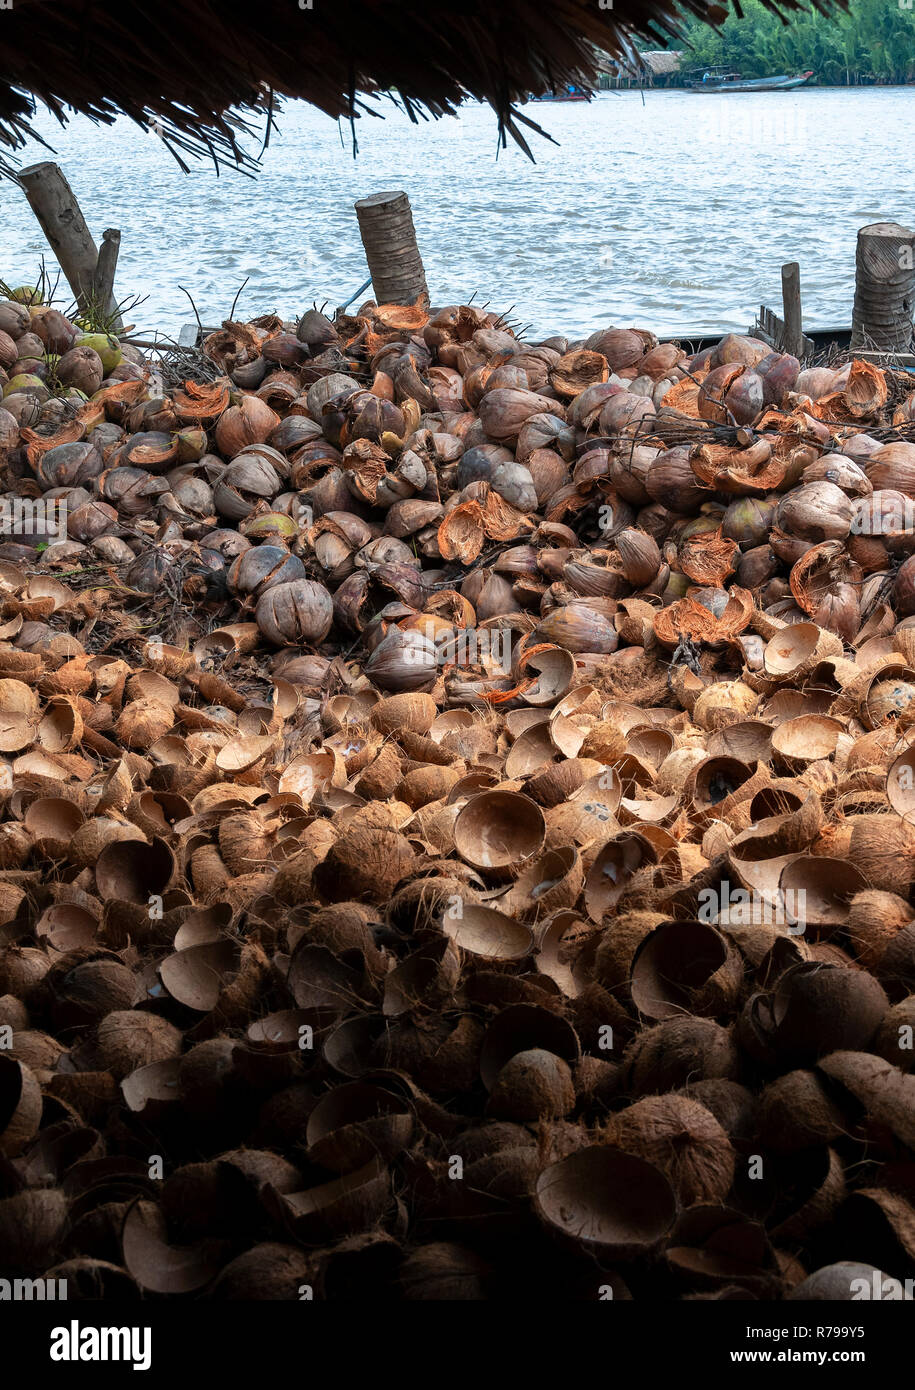 Pile of coconut husks alongside the tree lined bank on the Cai Rang River, Can Tho Province, South Vietnam Stock Photo